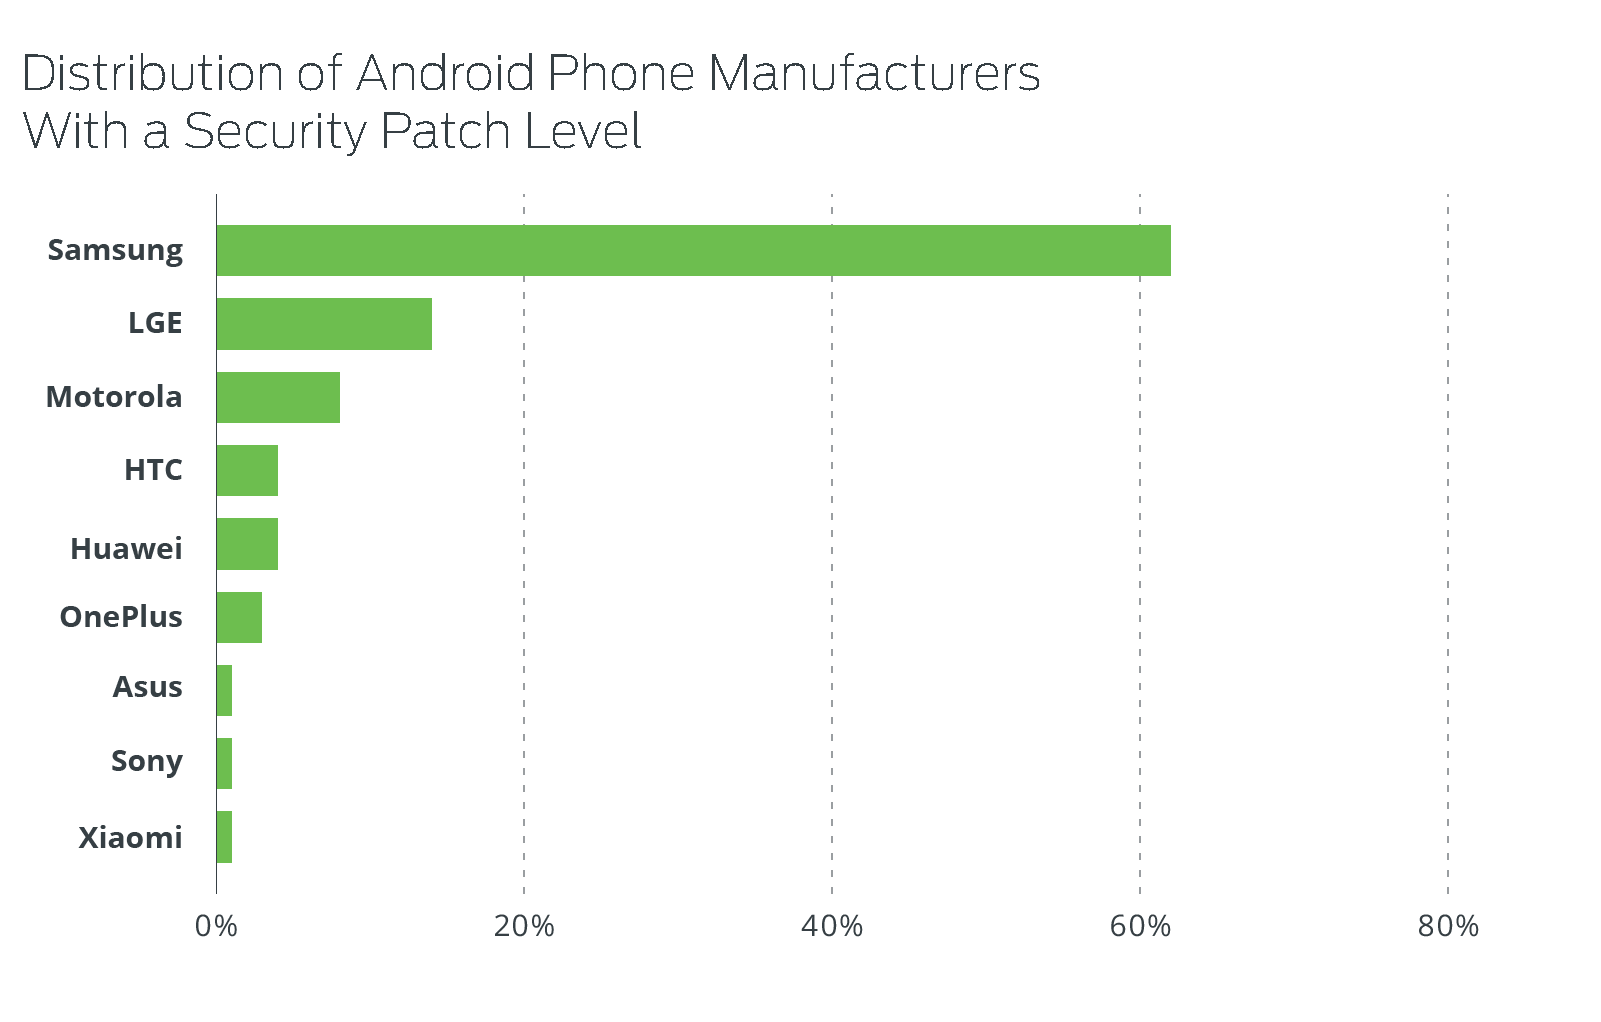 Distribution of Android Phone Manufacturers With a Security Patch Level